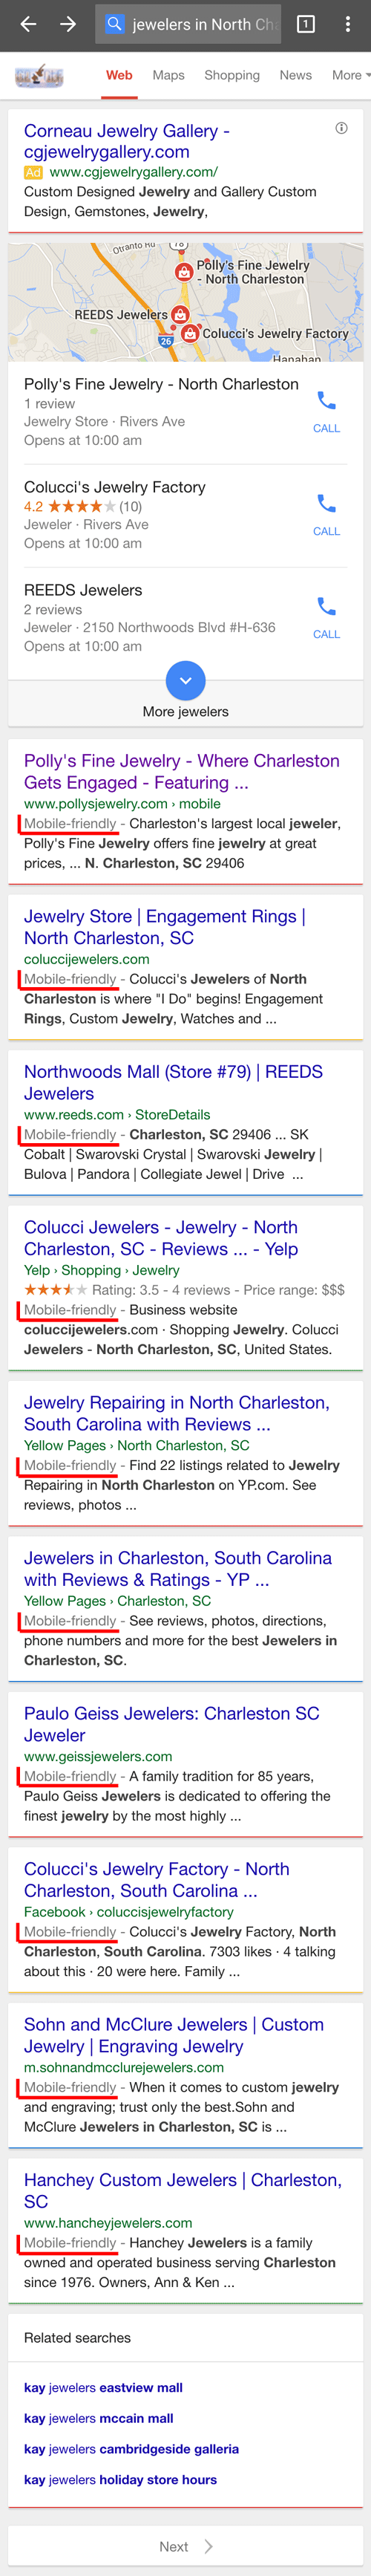 Pollys Fine Jewelry Website Review 1280-SERP-53